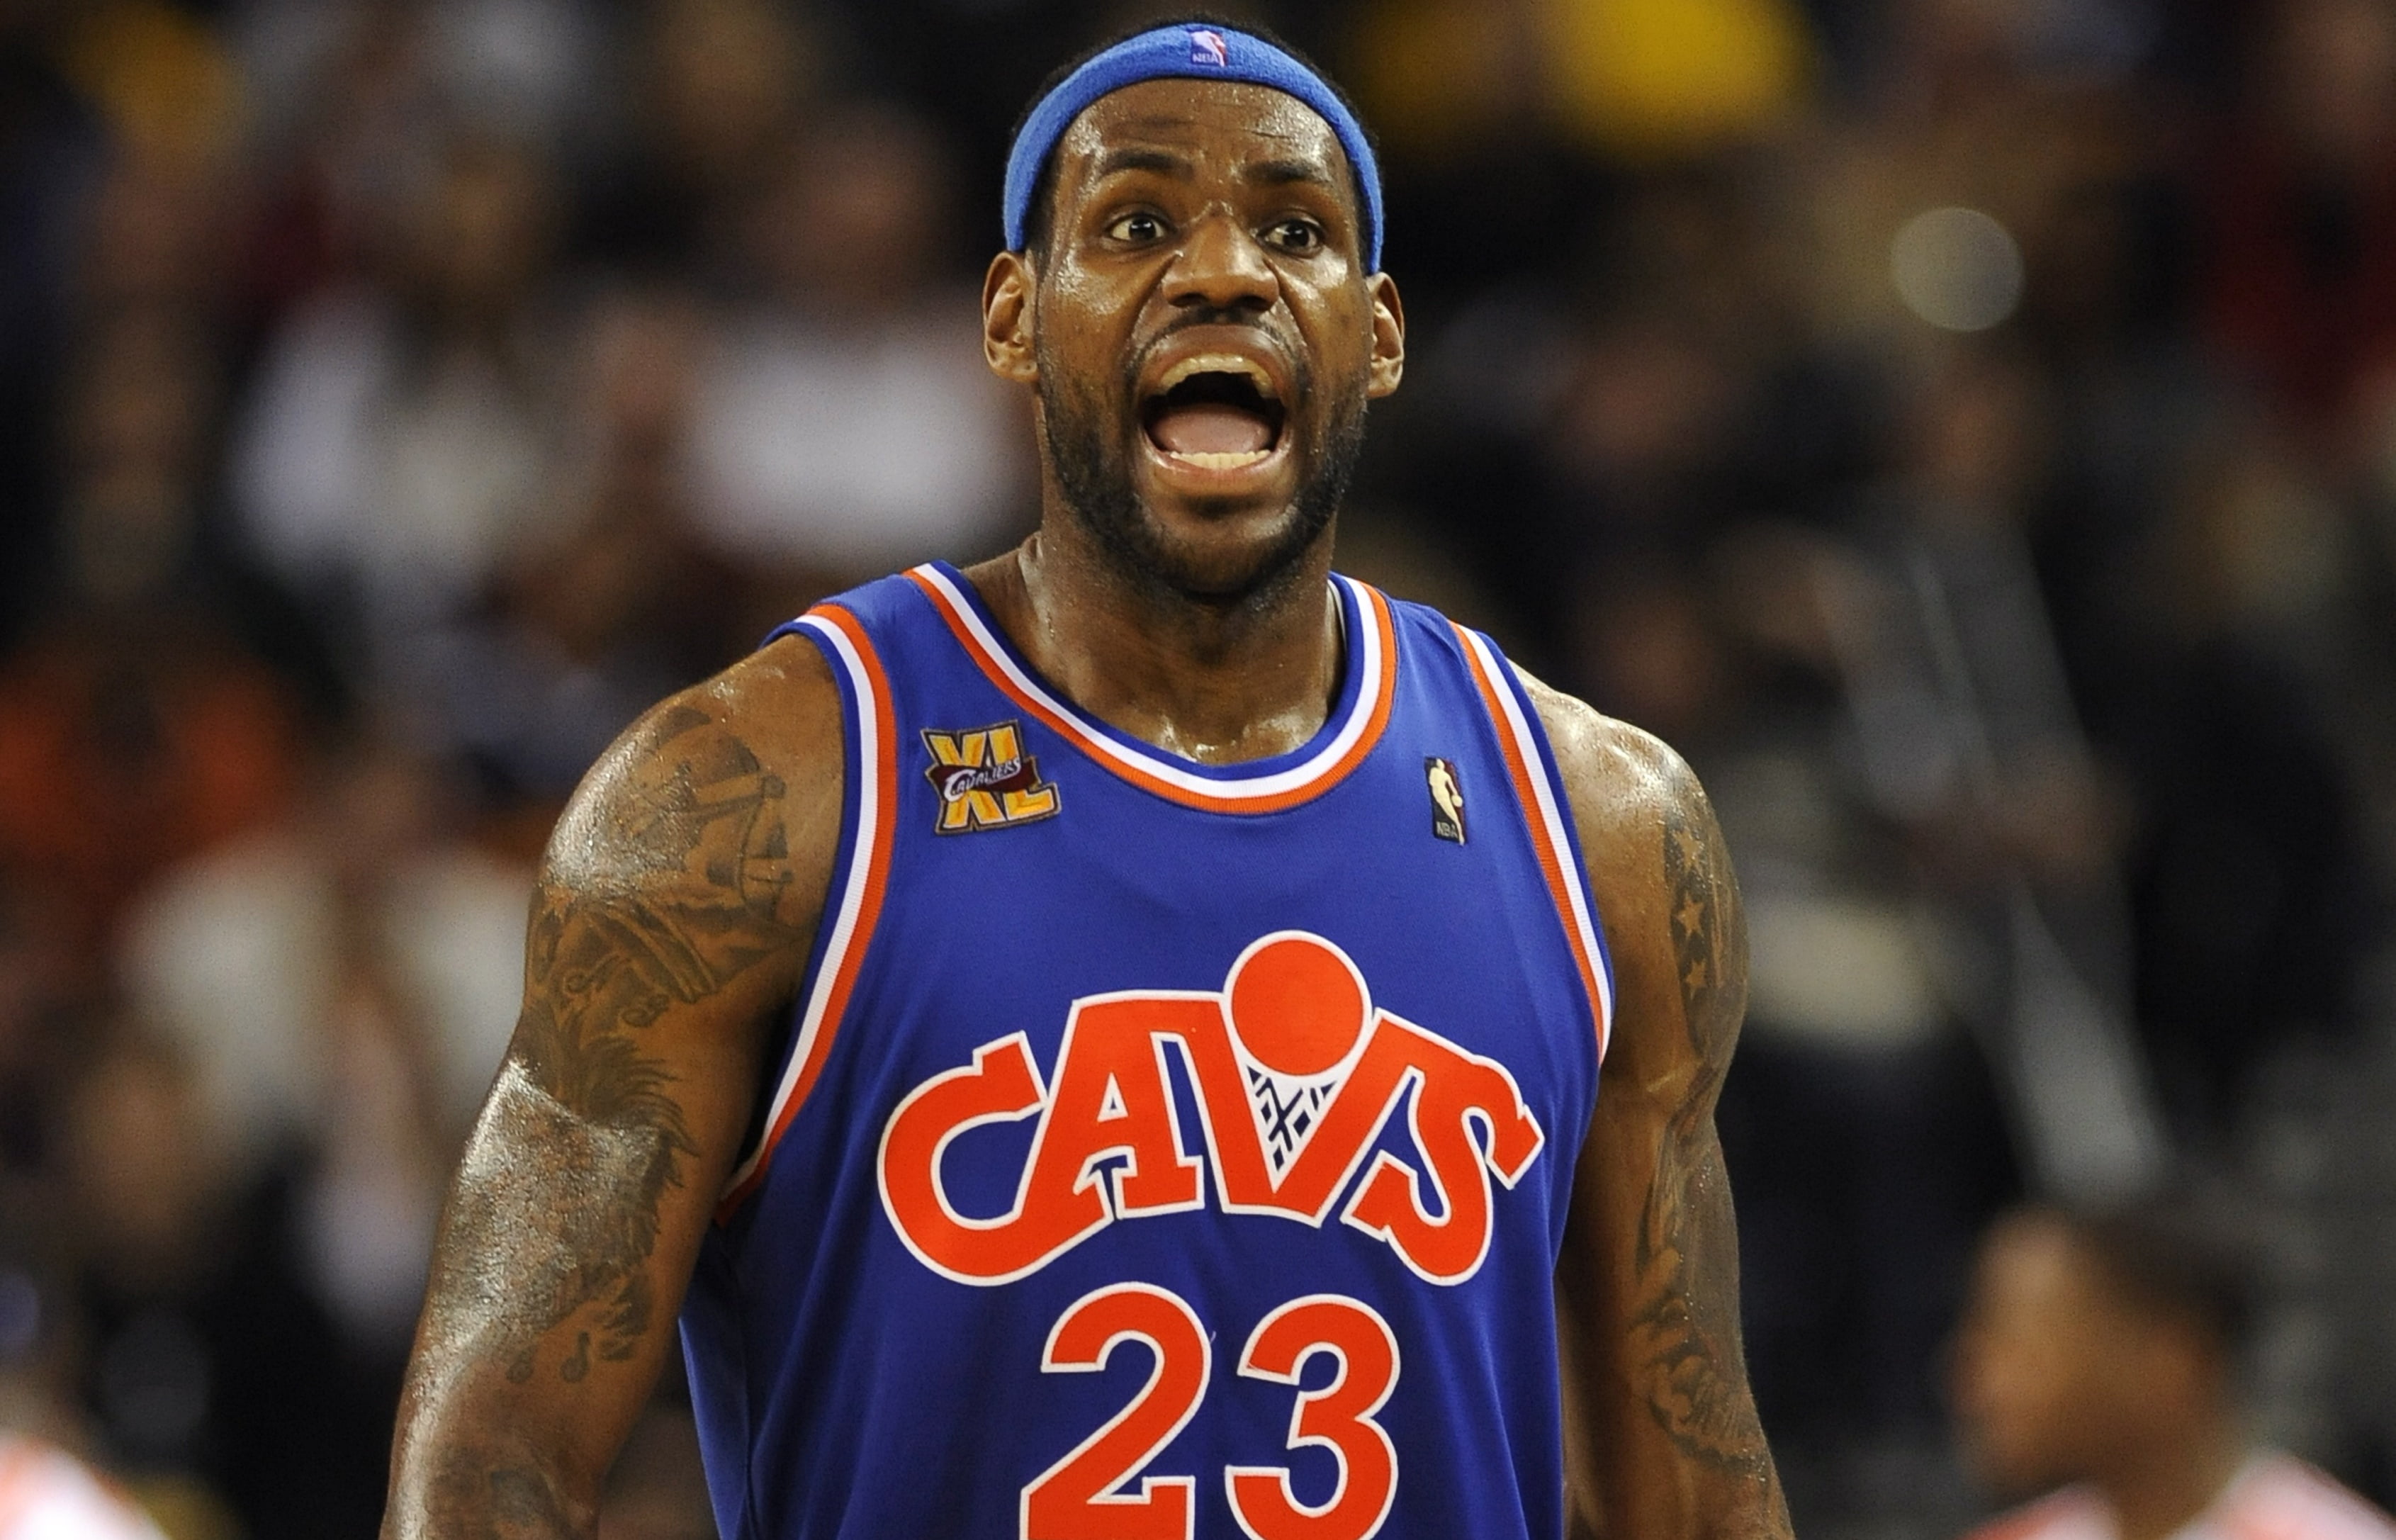 lebron james from cleveland cavaliers